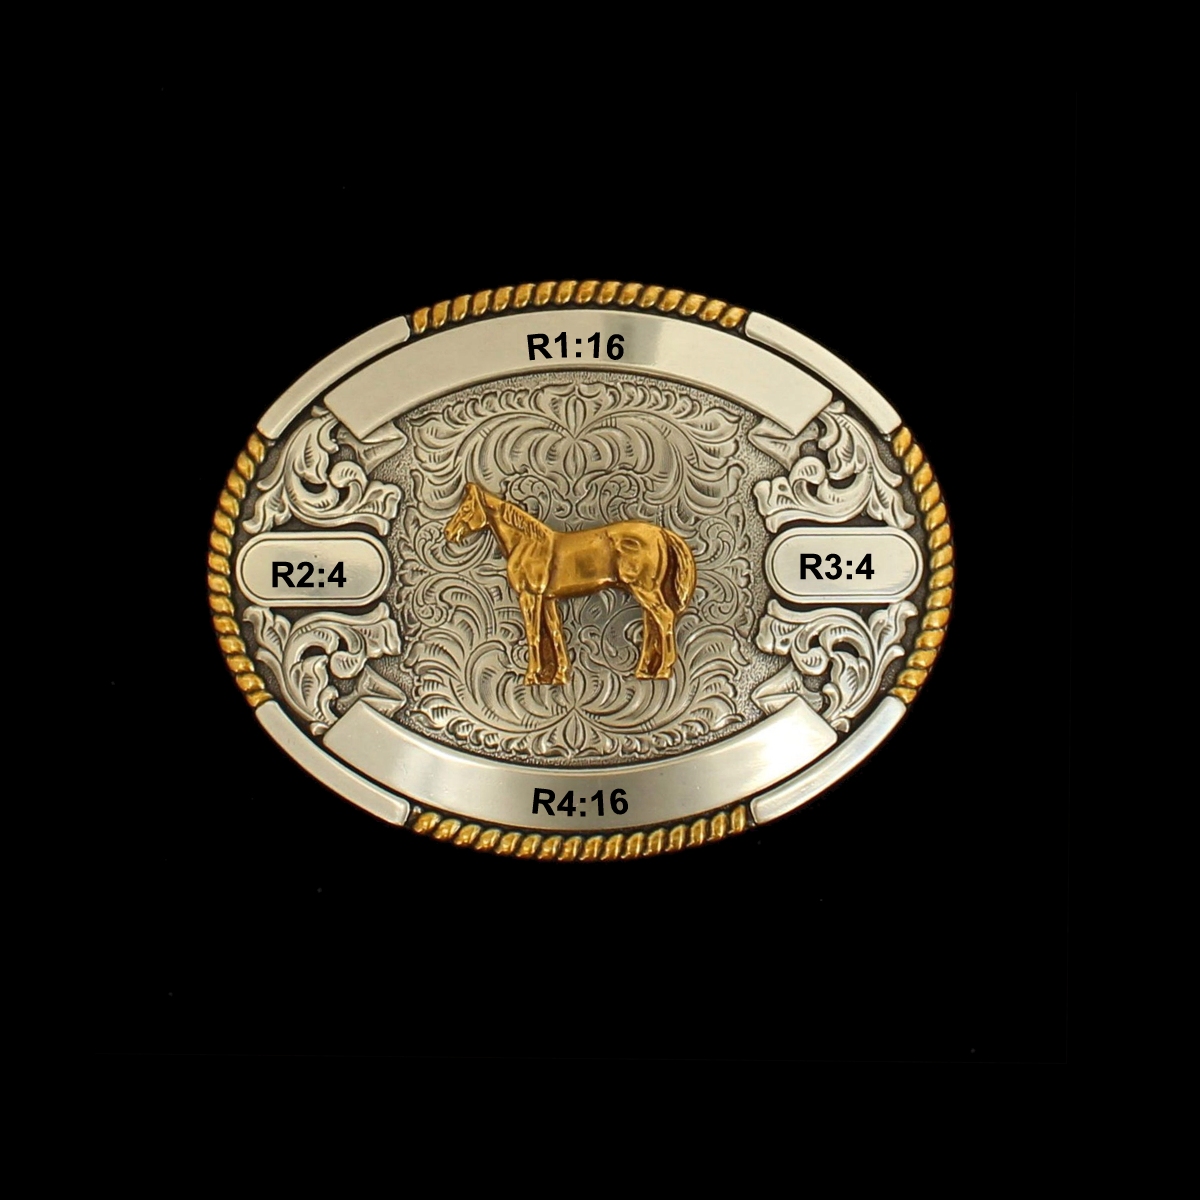 MF-38646 Trophy Buckle Oval Standing Horse 4 Ribbons 2-7/8x3-3/4